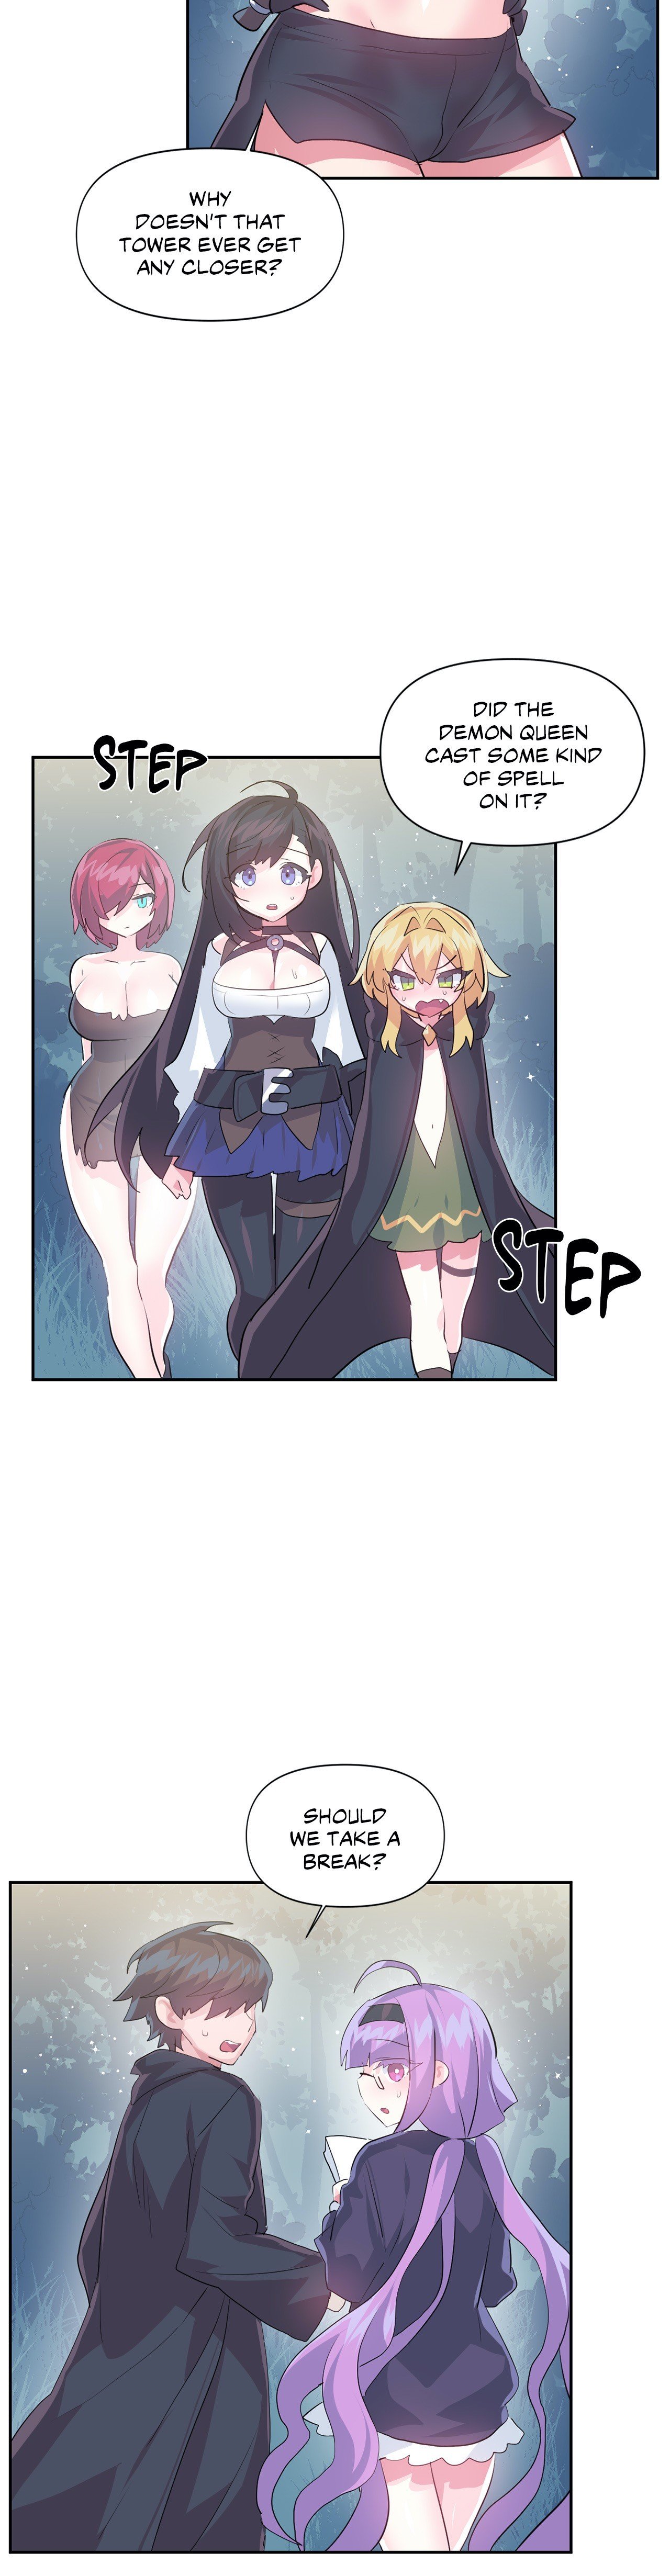 log-in-to-lust-a-land-chap-37-19